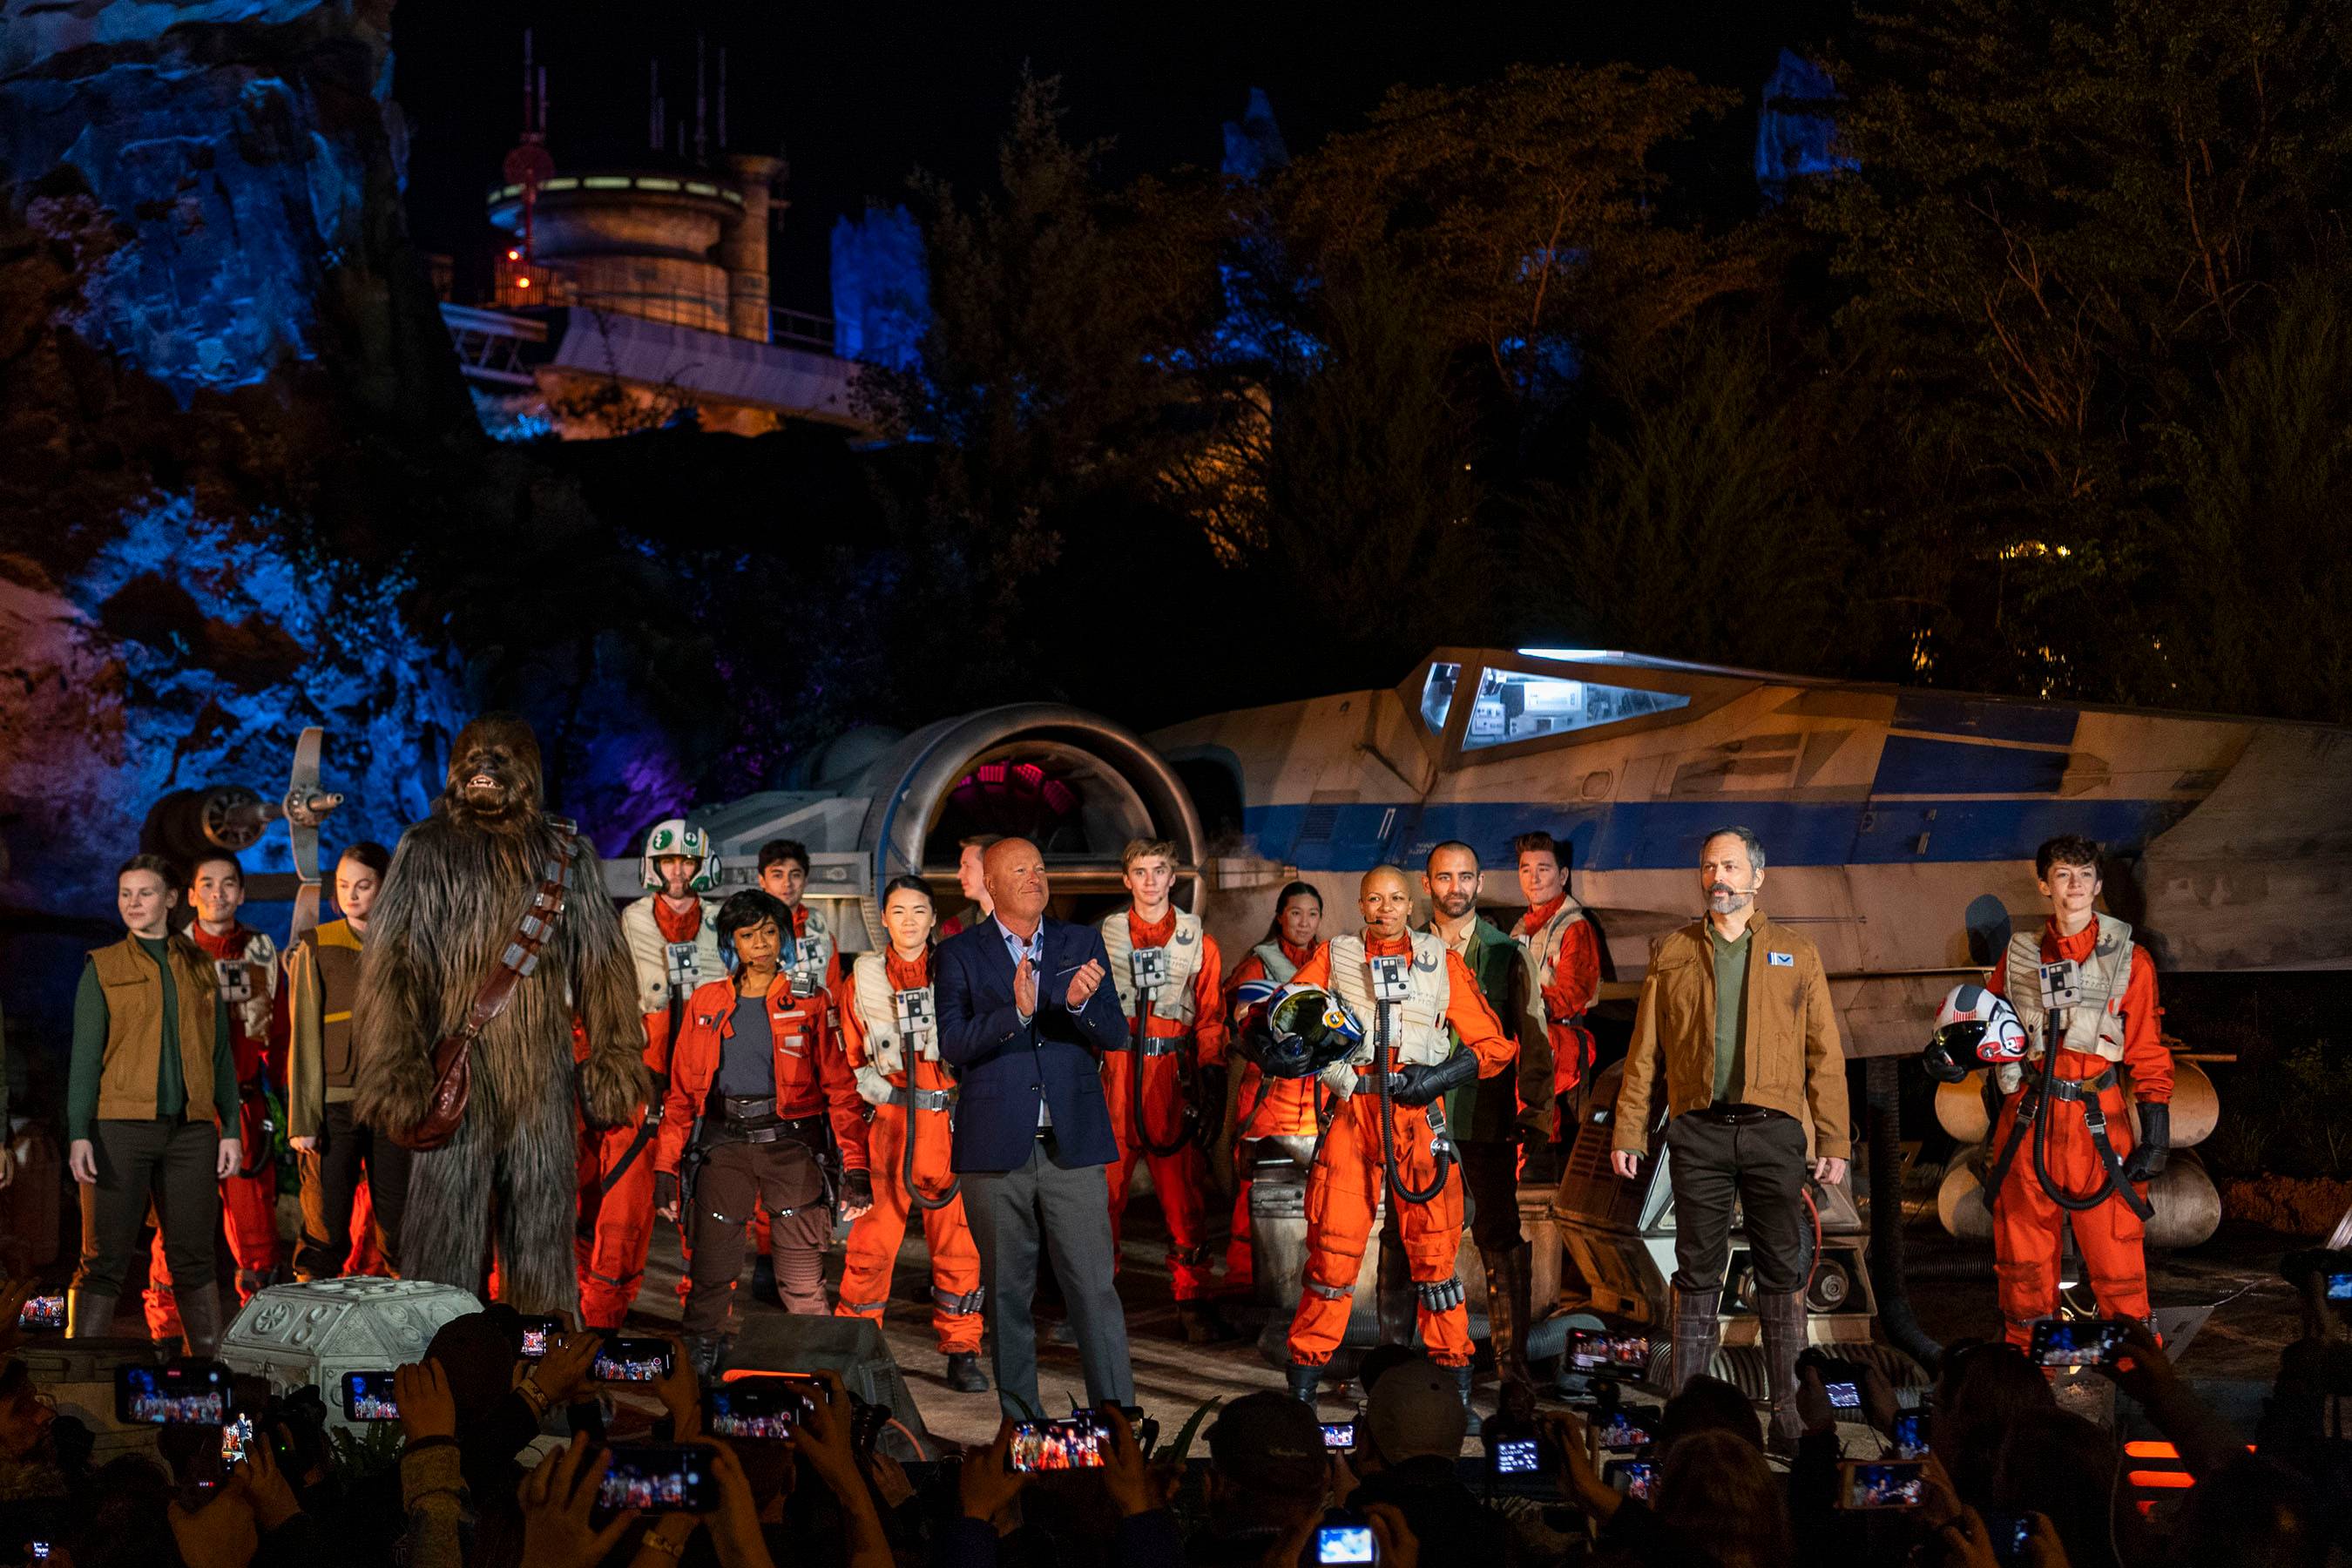 PHOTOS - Dedication ceremony for Star Wars: Rise of the Resistance